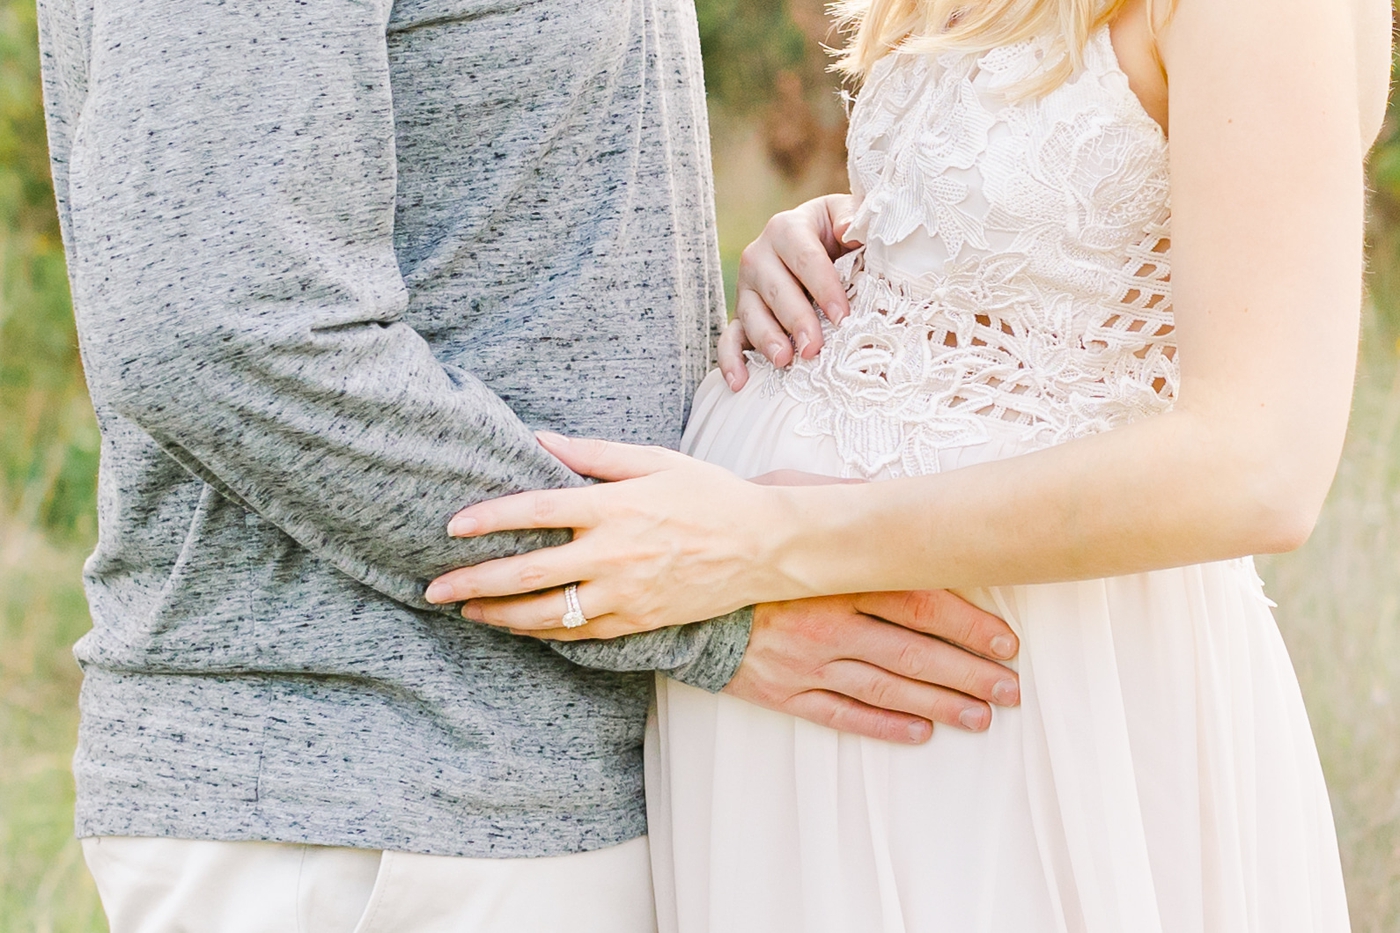 Closeup of parents hugging baby bump in maternity photoshoot. Photo by Sana Ahmed Photography.